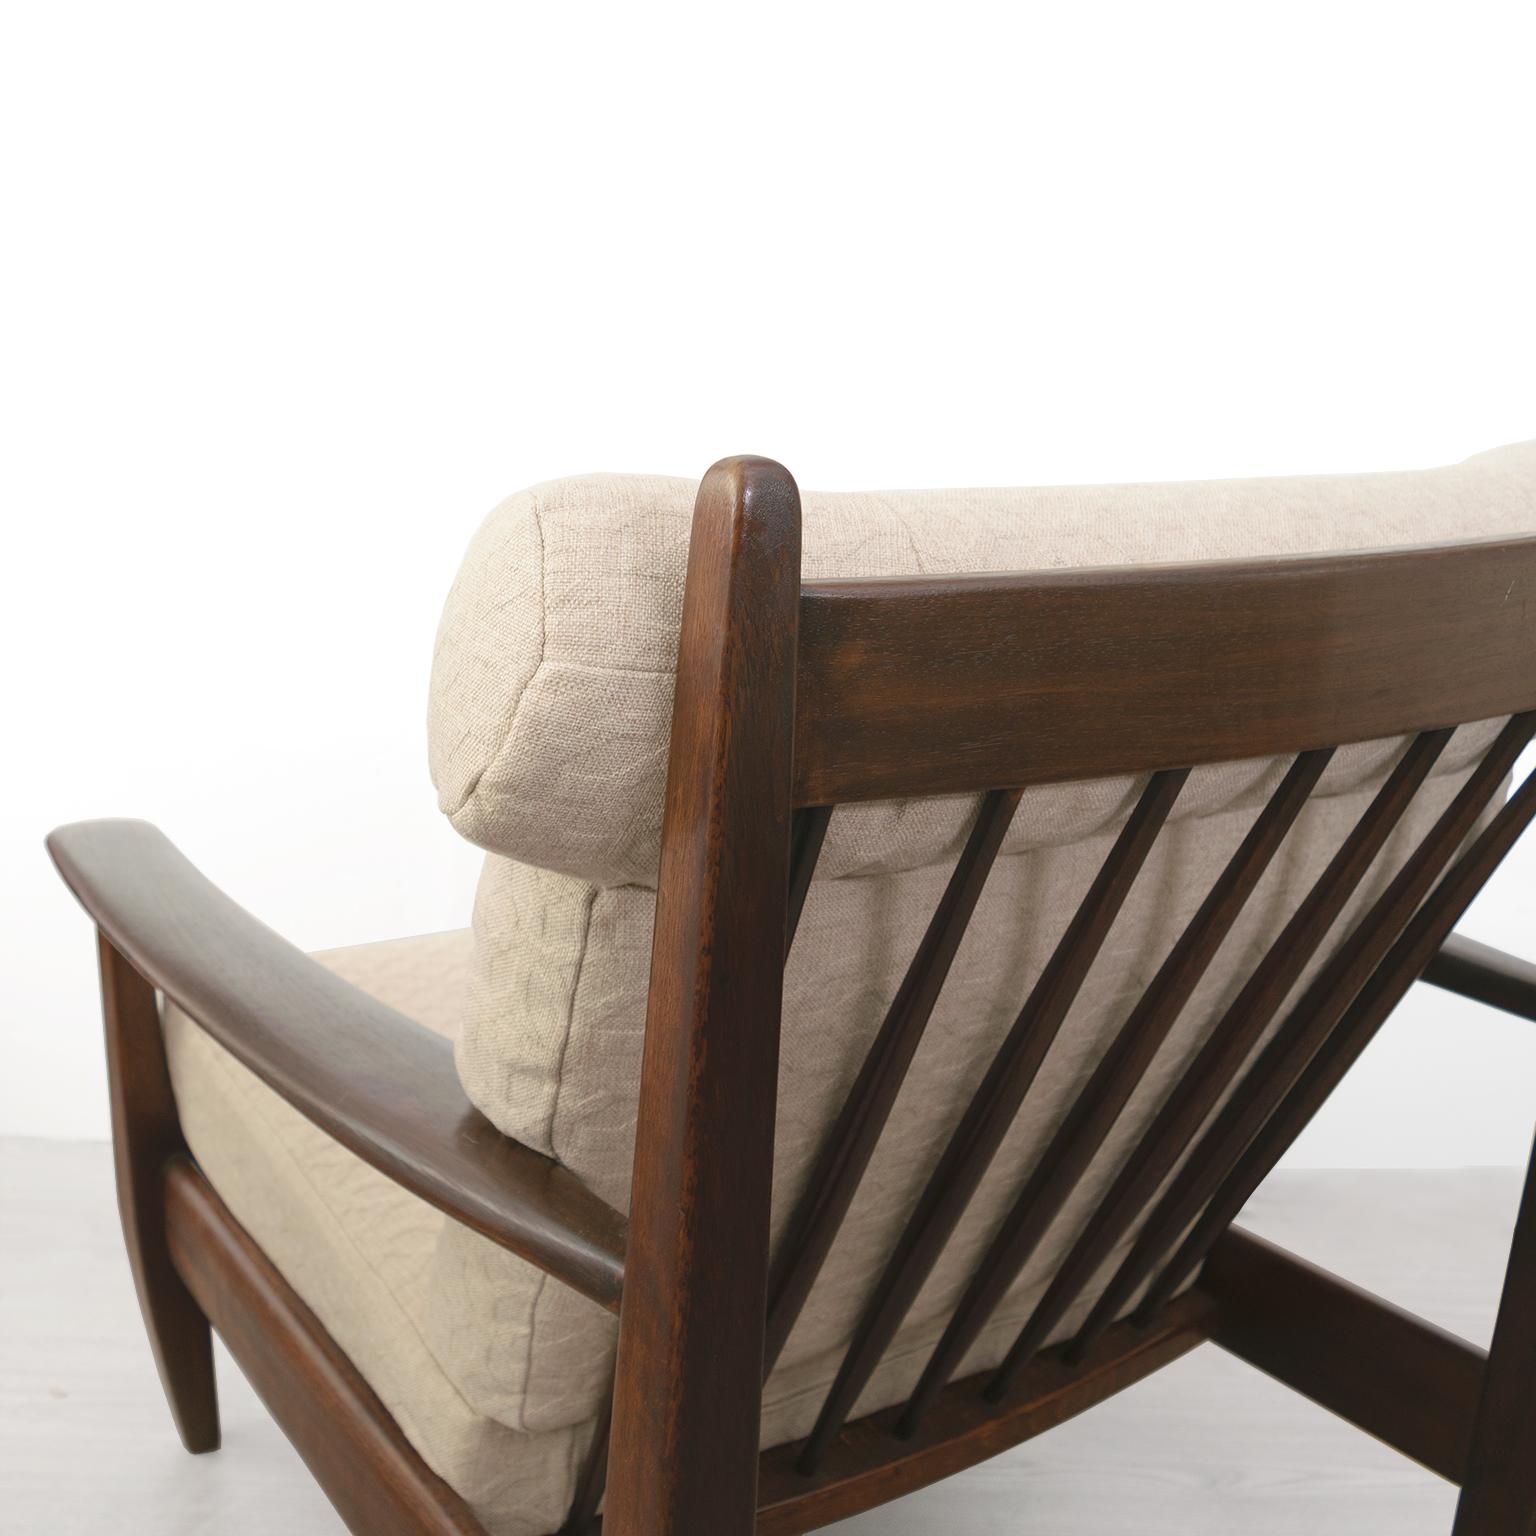 Upholstery Brazilian Pair of Lounge Chairs in Carved Solid Teak, 1960'S For Sale